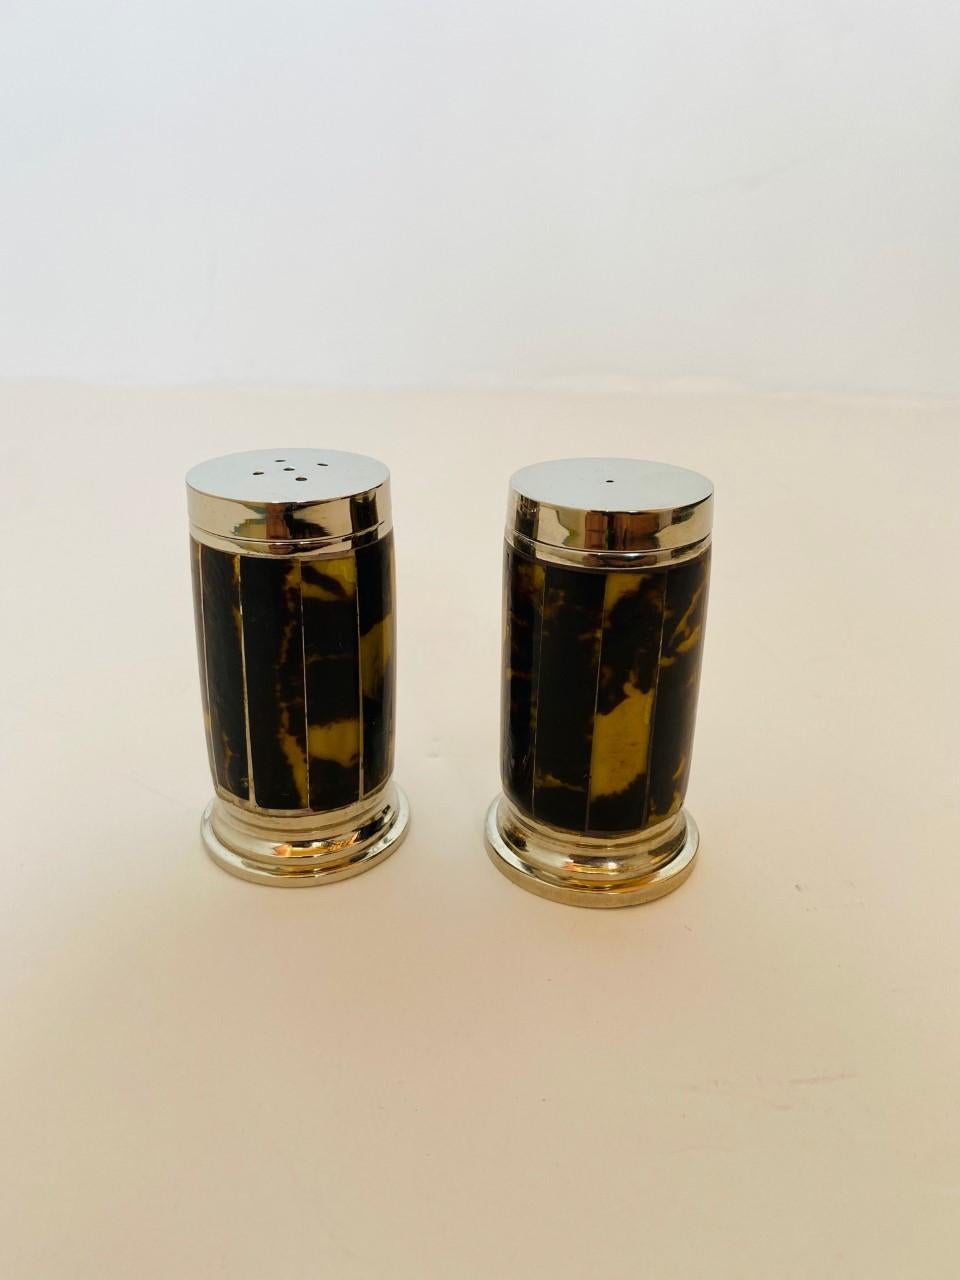 Late 20th Century Wentworth Ralph Lauren Tortoise Shell Salt and Pepper Shakers